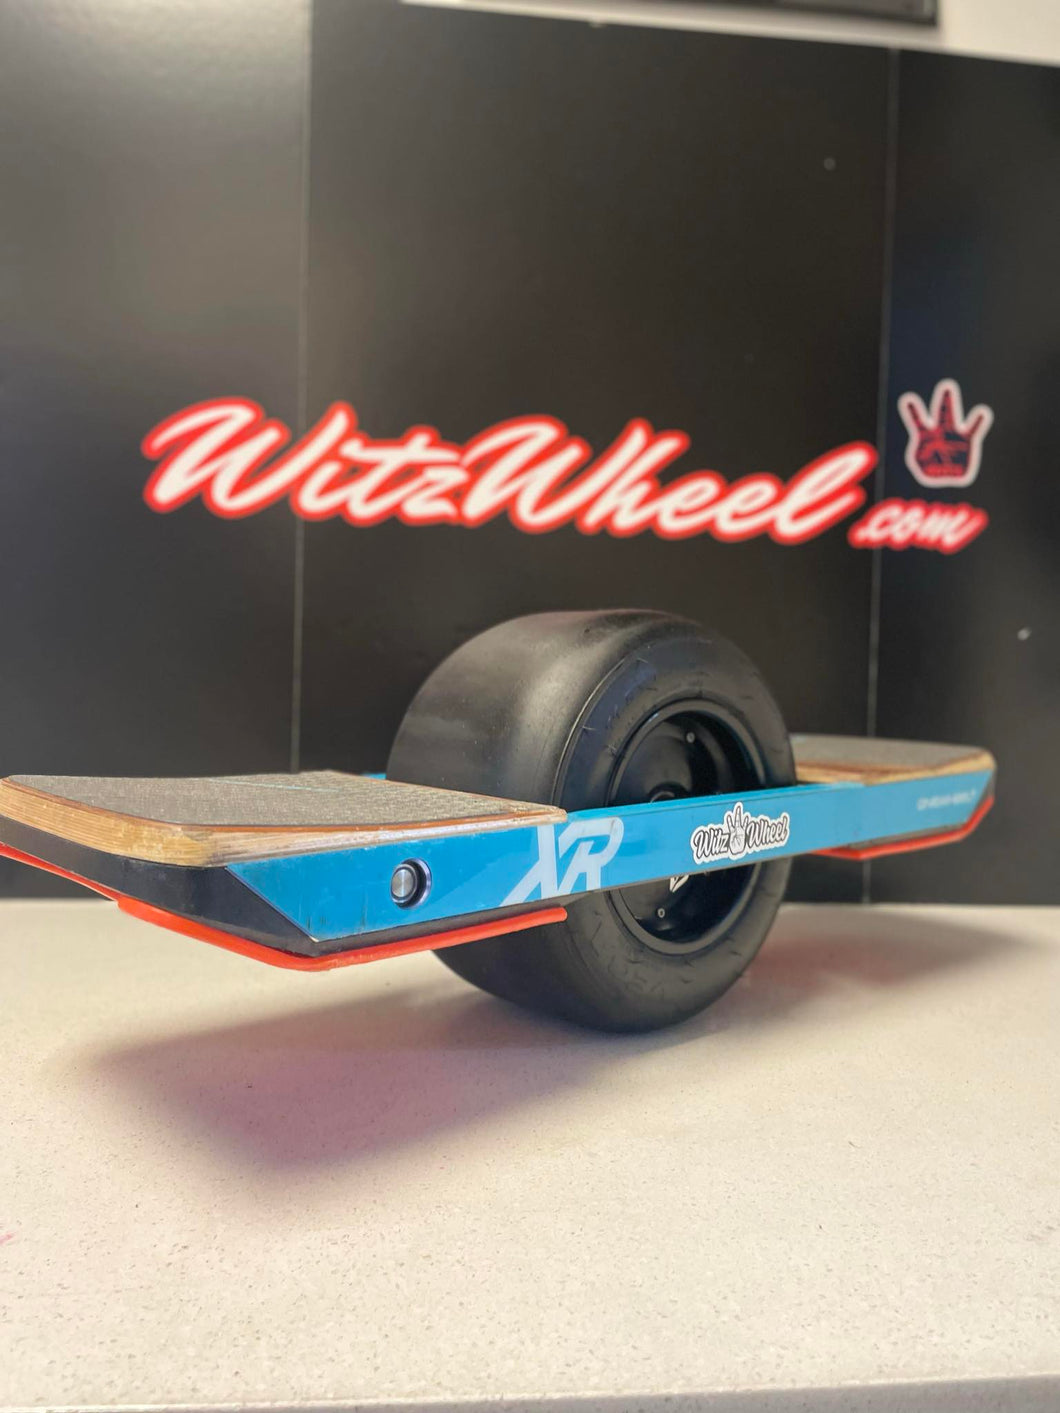 LIKE NEW 4212 Onewheel XR w/ only 29 miles!  #42